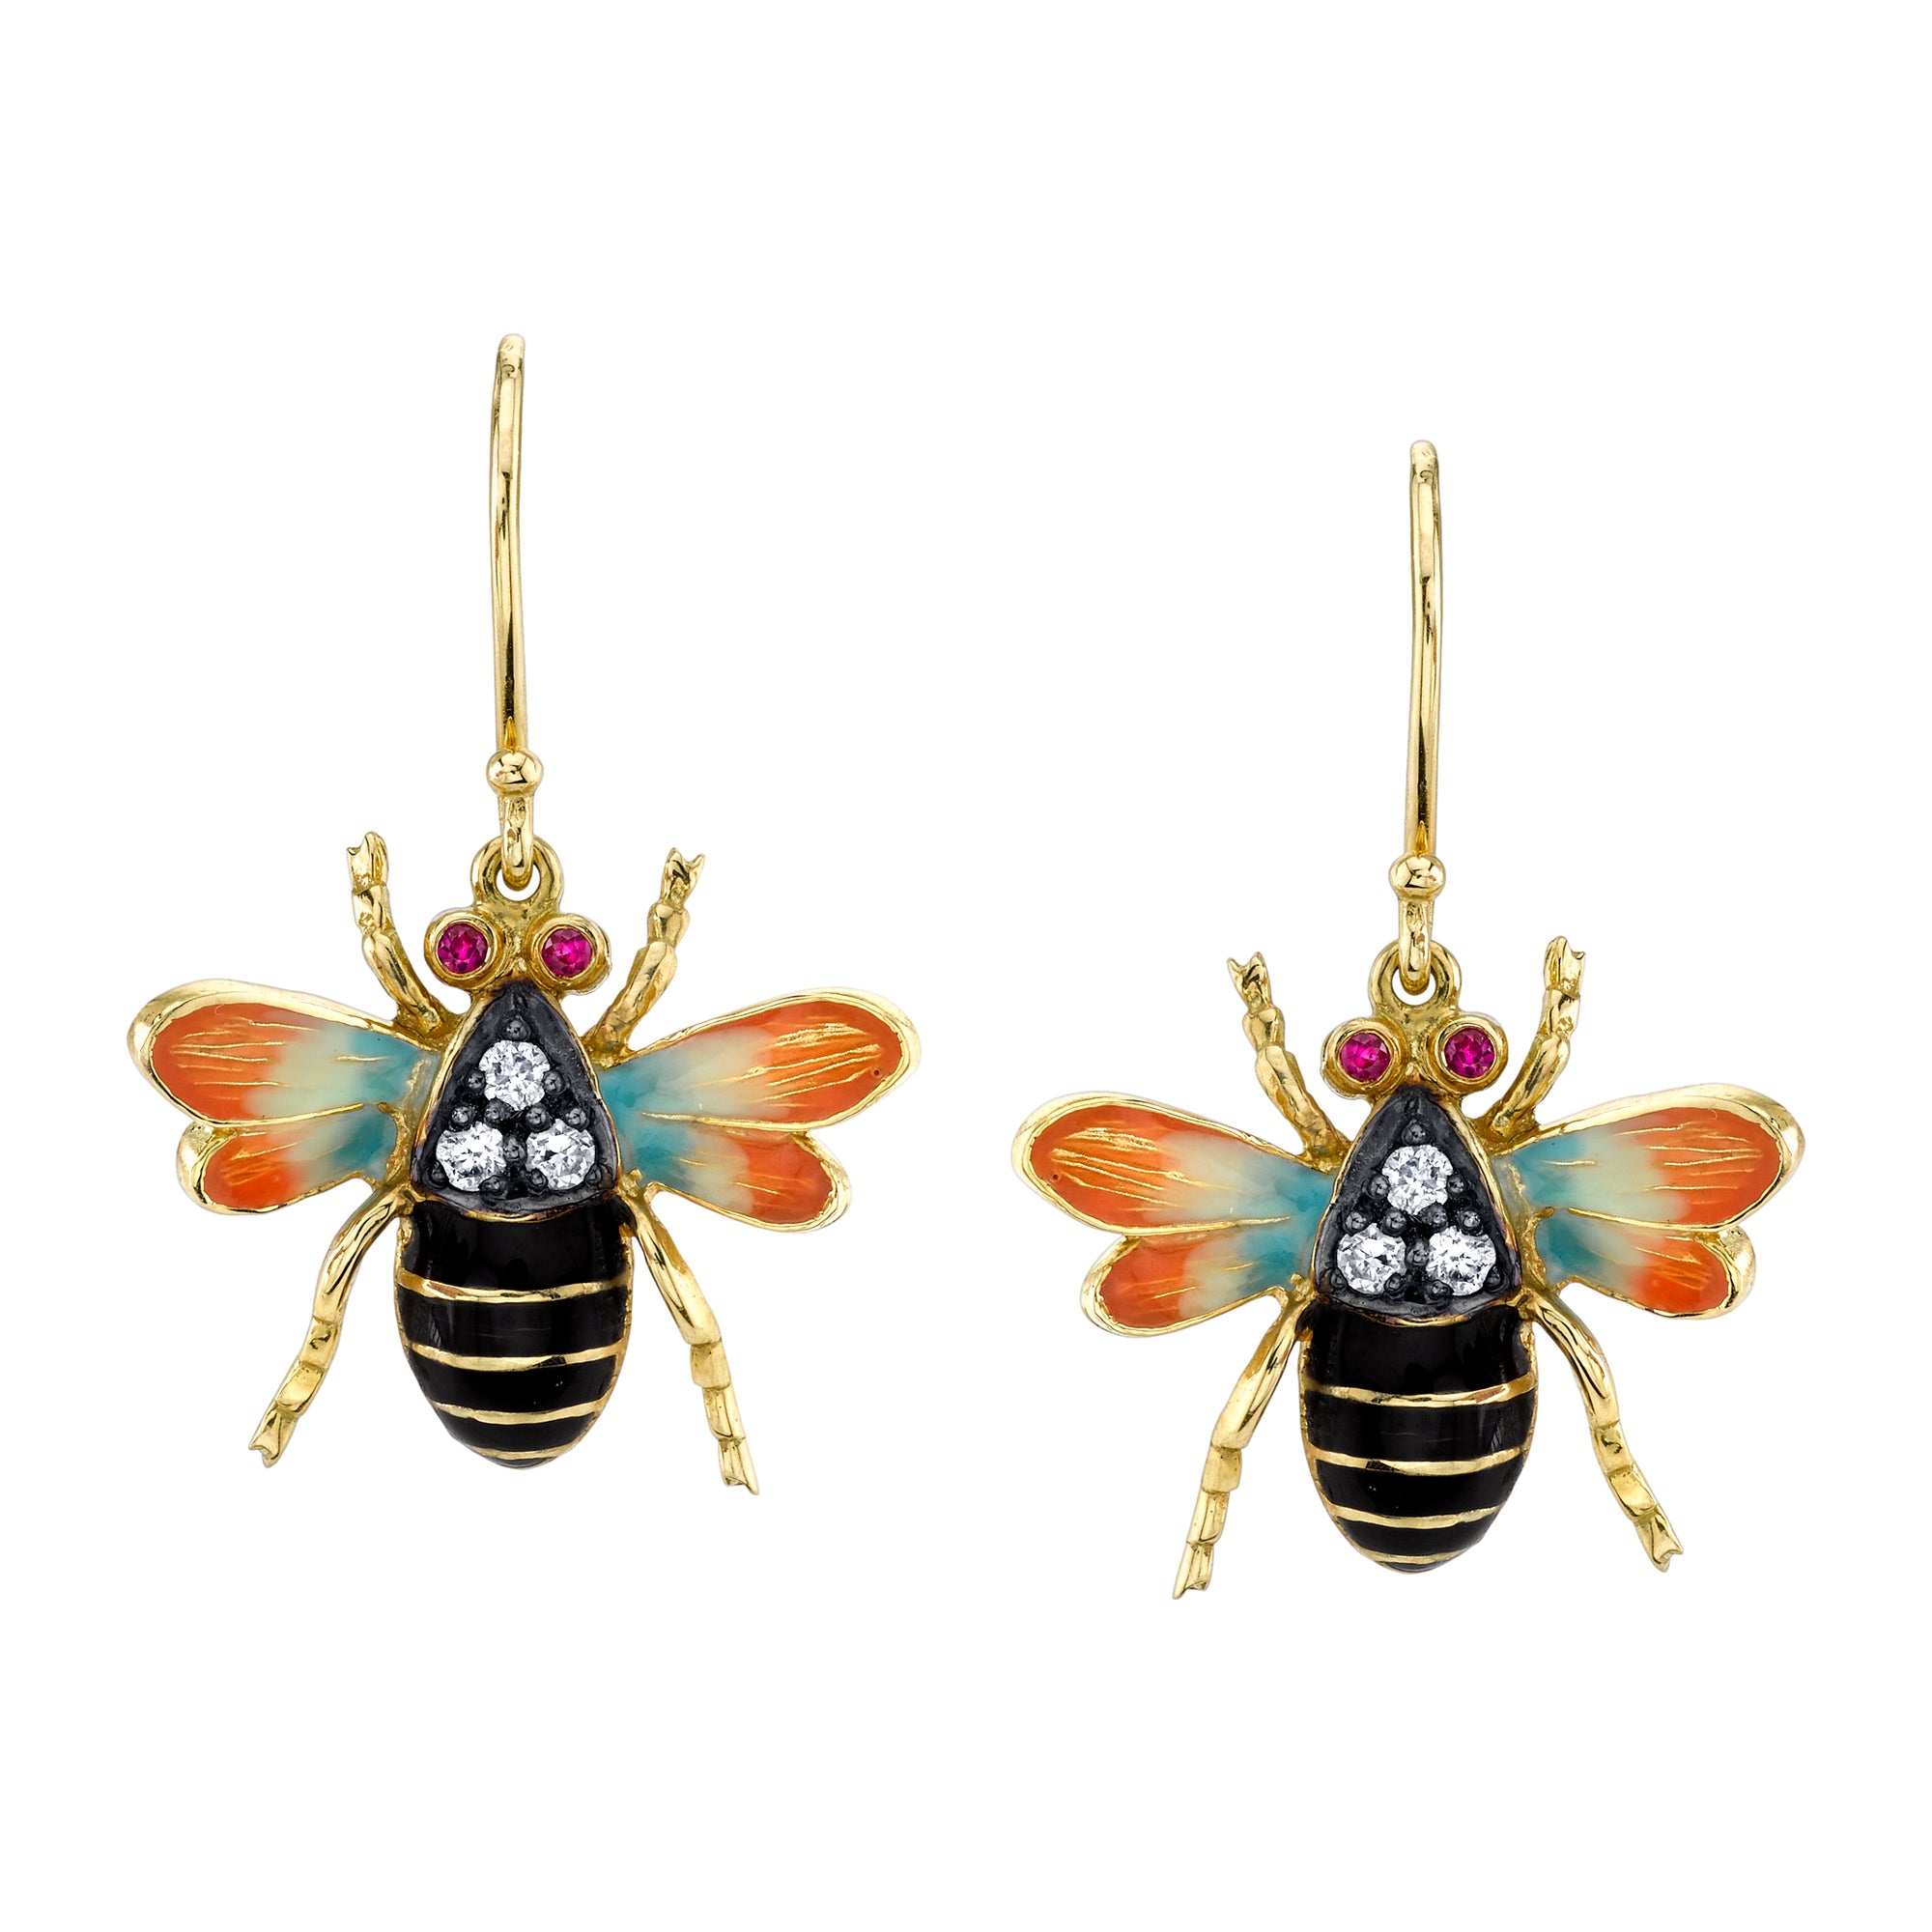 18k Yellow Gold and Enameled Bumble Bee Drop Earrings by Lord Jewelry - Talisman Collection Fine Jewelers